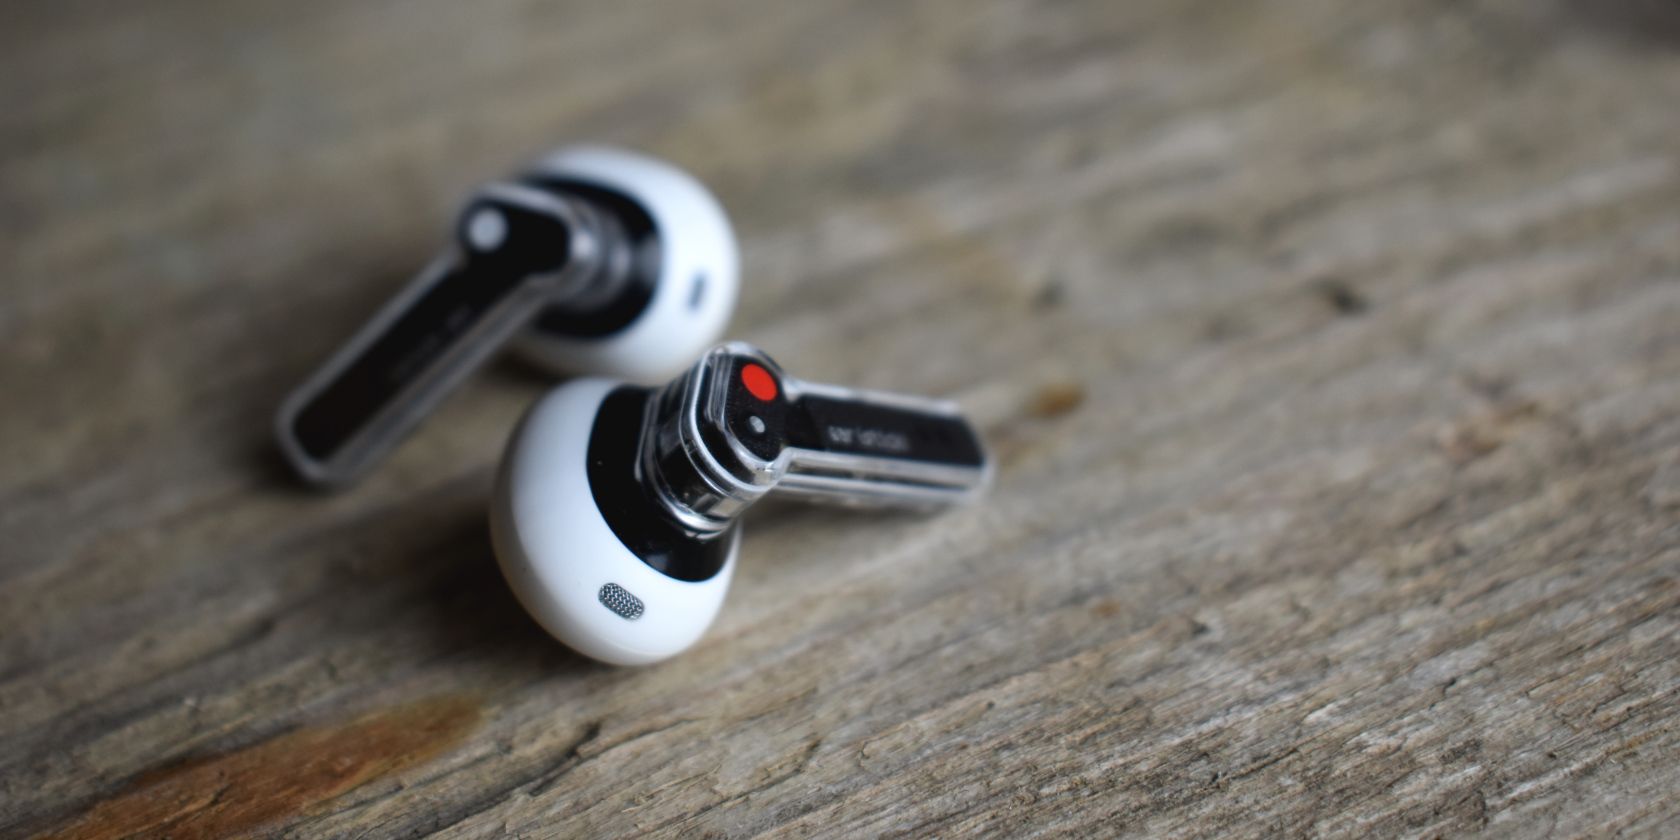 Nothing Ear (Stick) Review: $99 Wireless Earbuds Have Never Been So Fun